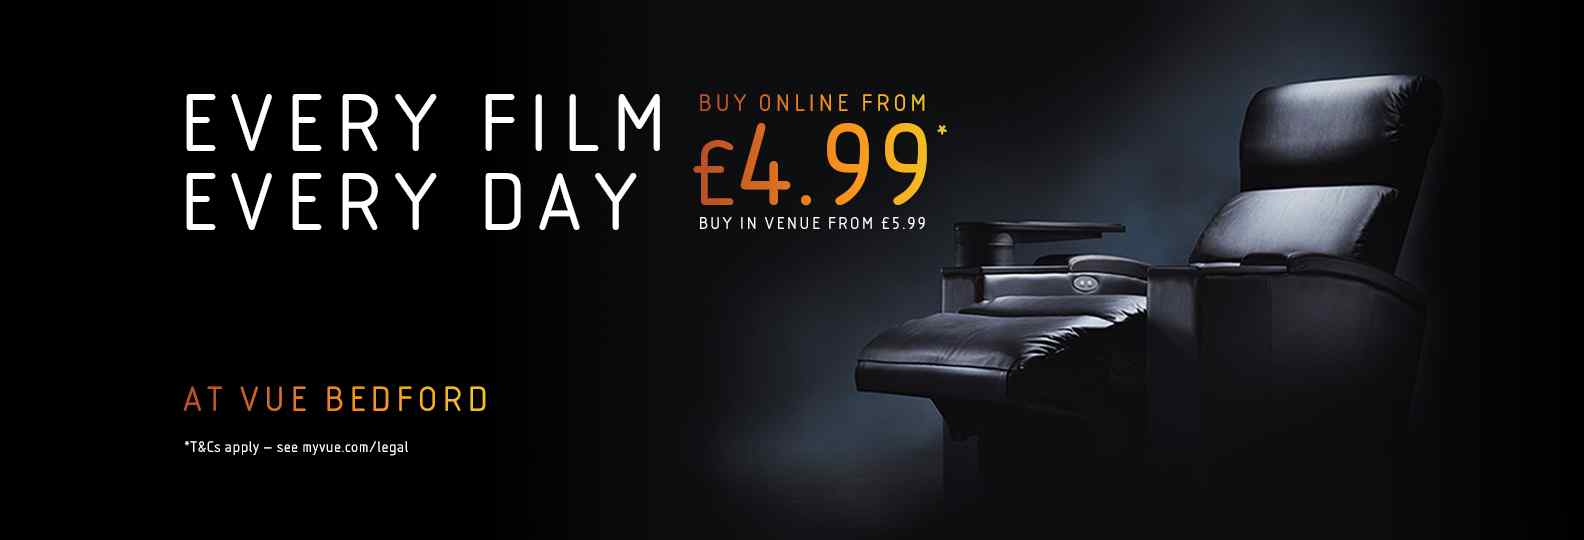 Vue Bedford | Every Film, Every Day from £4.99